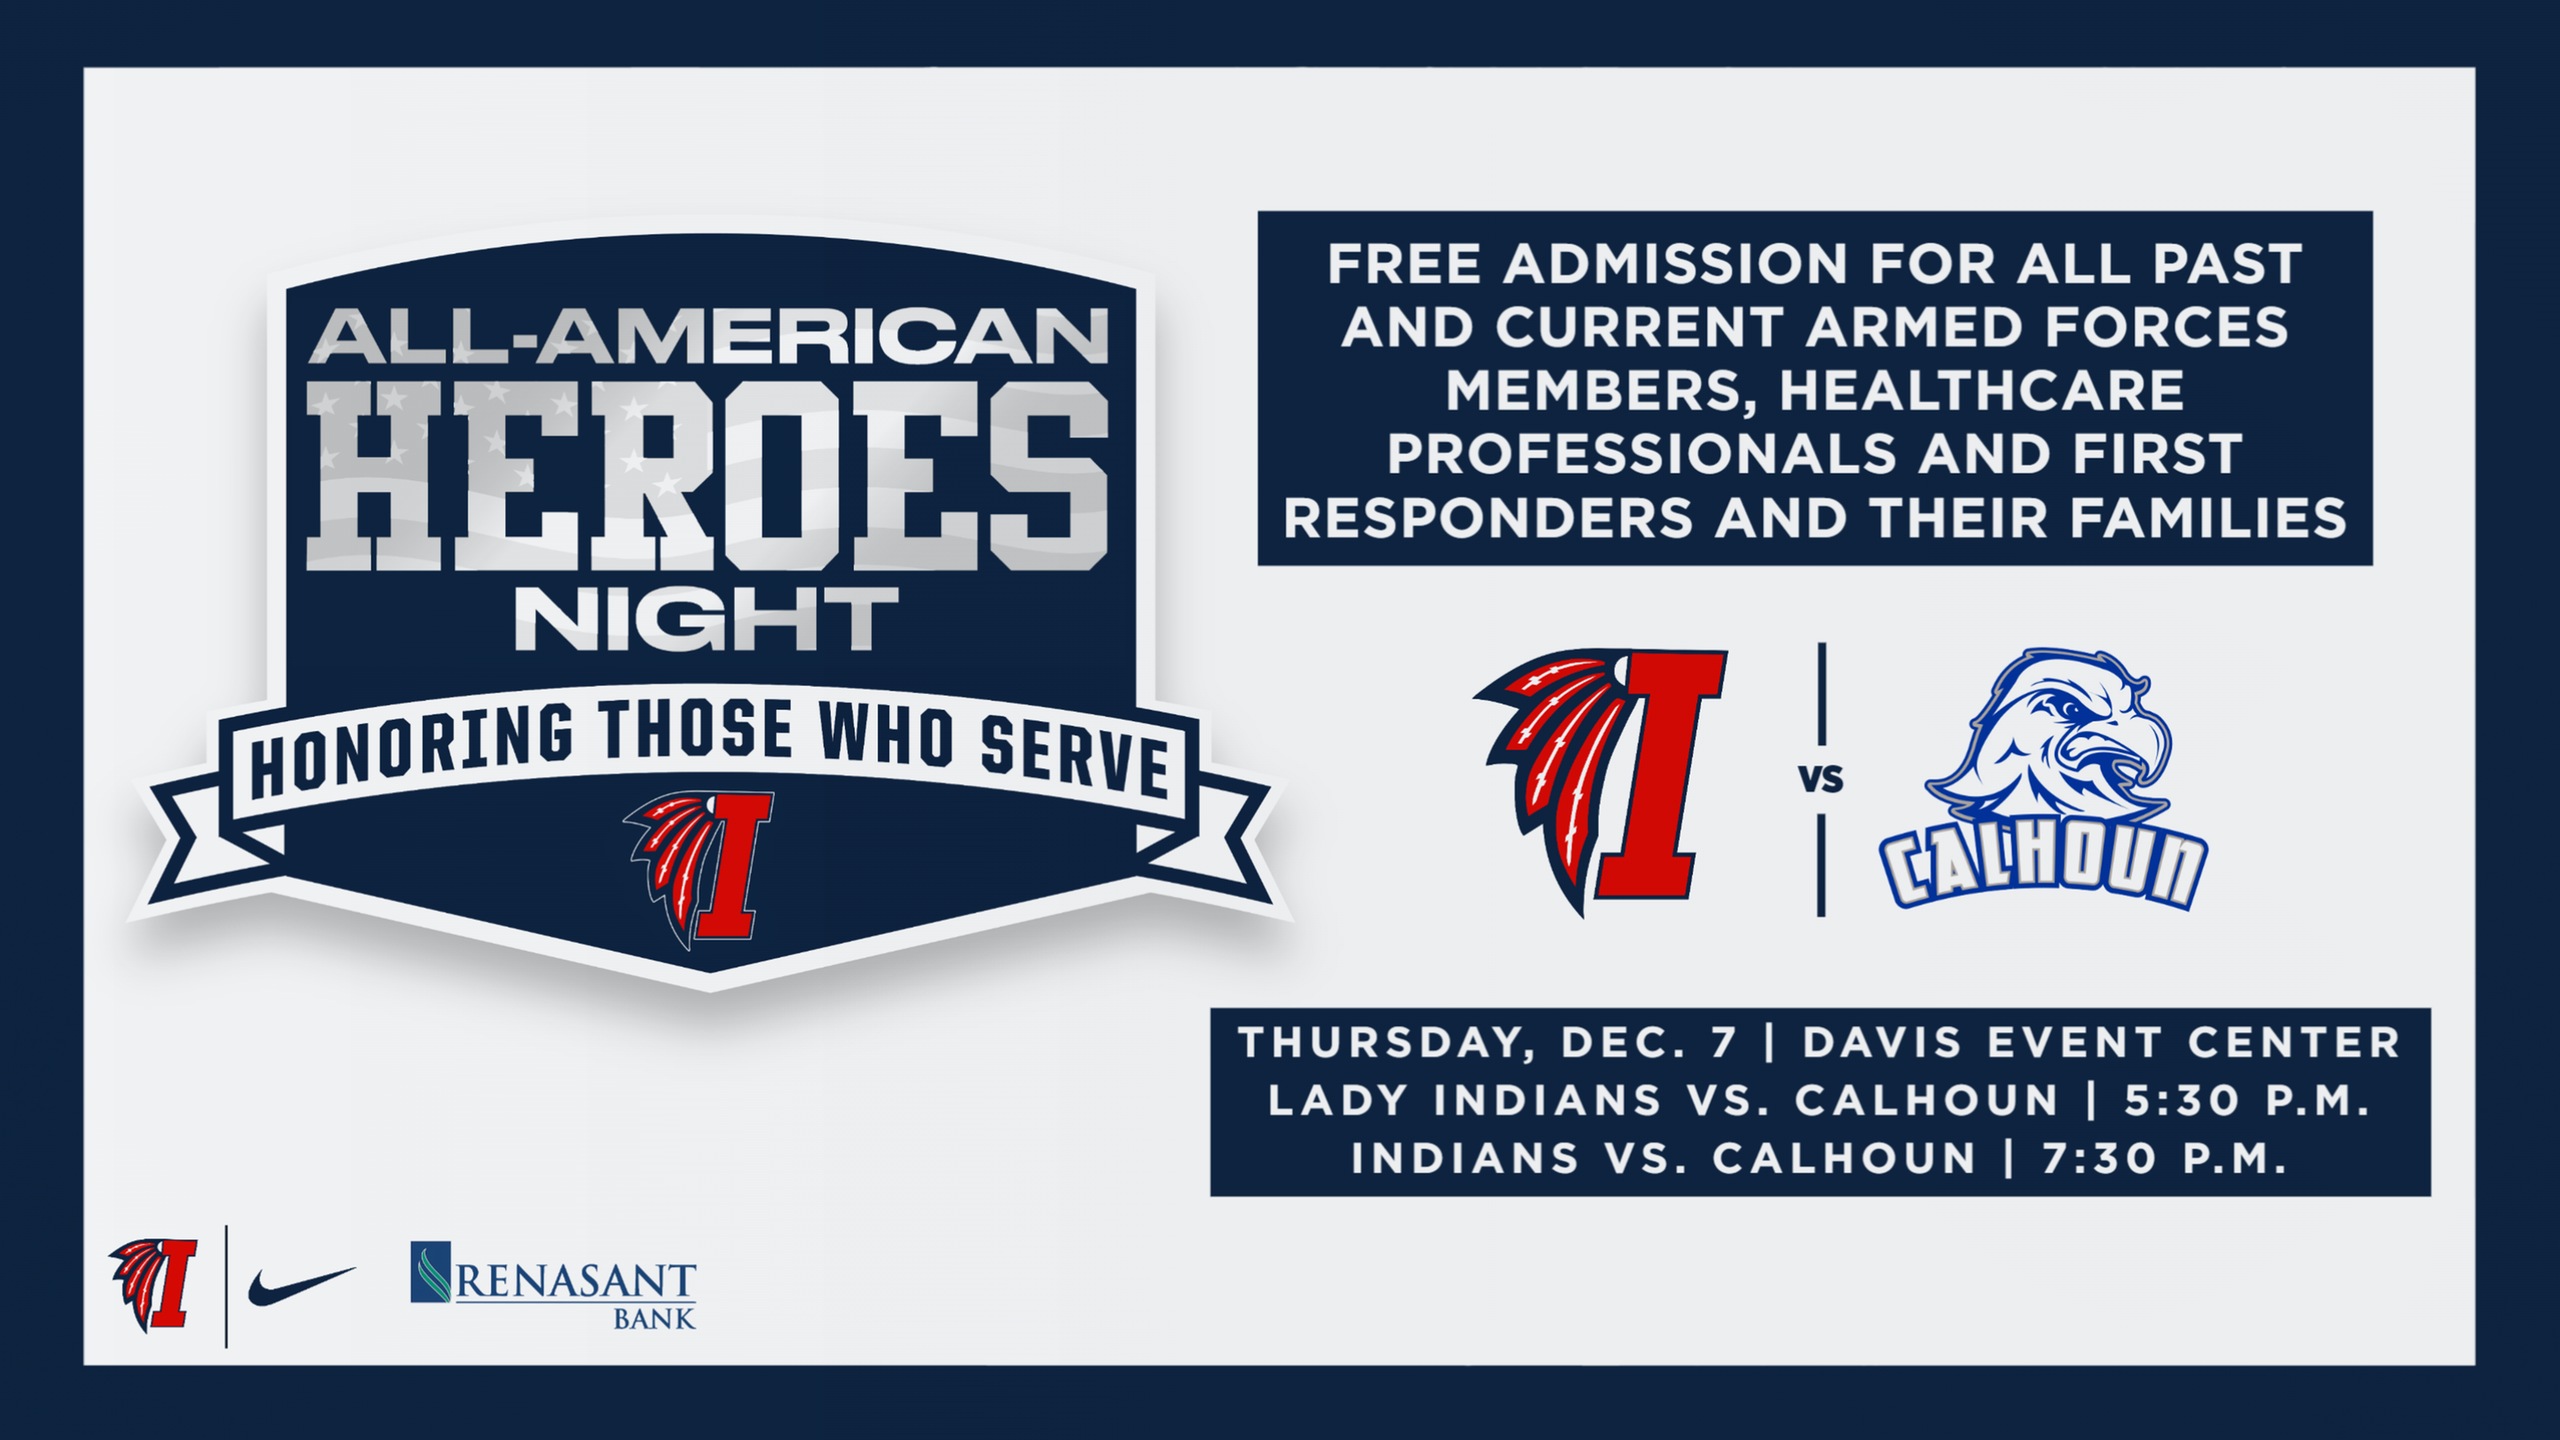 Basketball to host All-American Heroes Night on Dec. 7